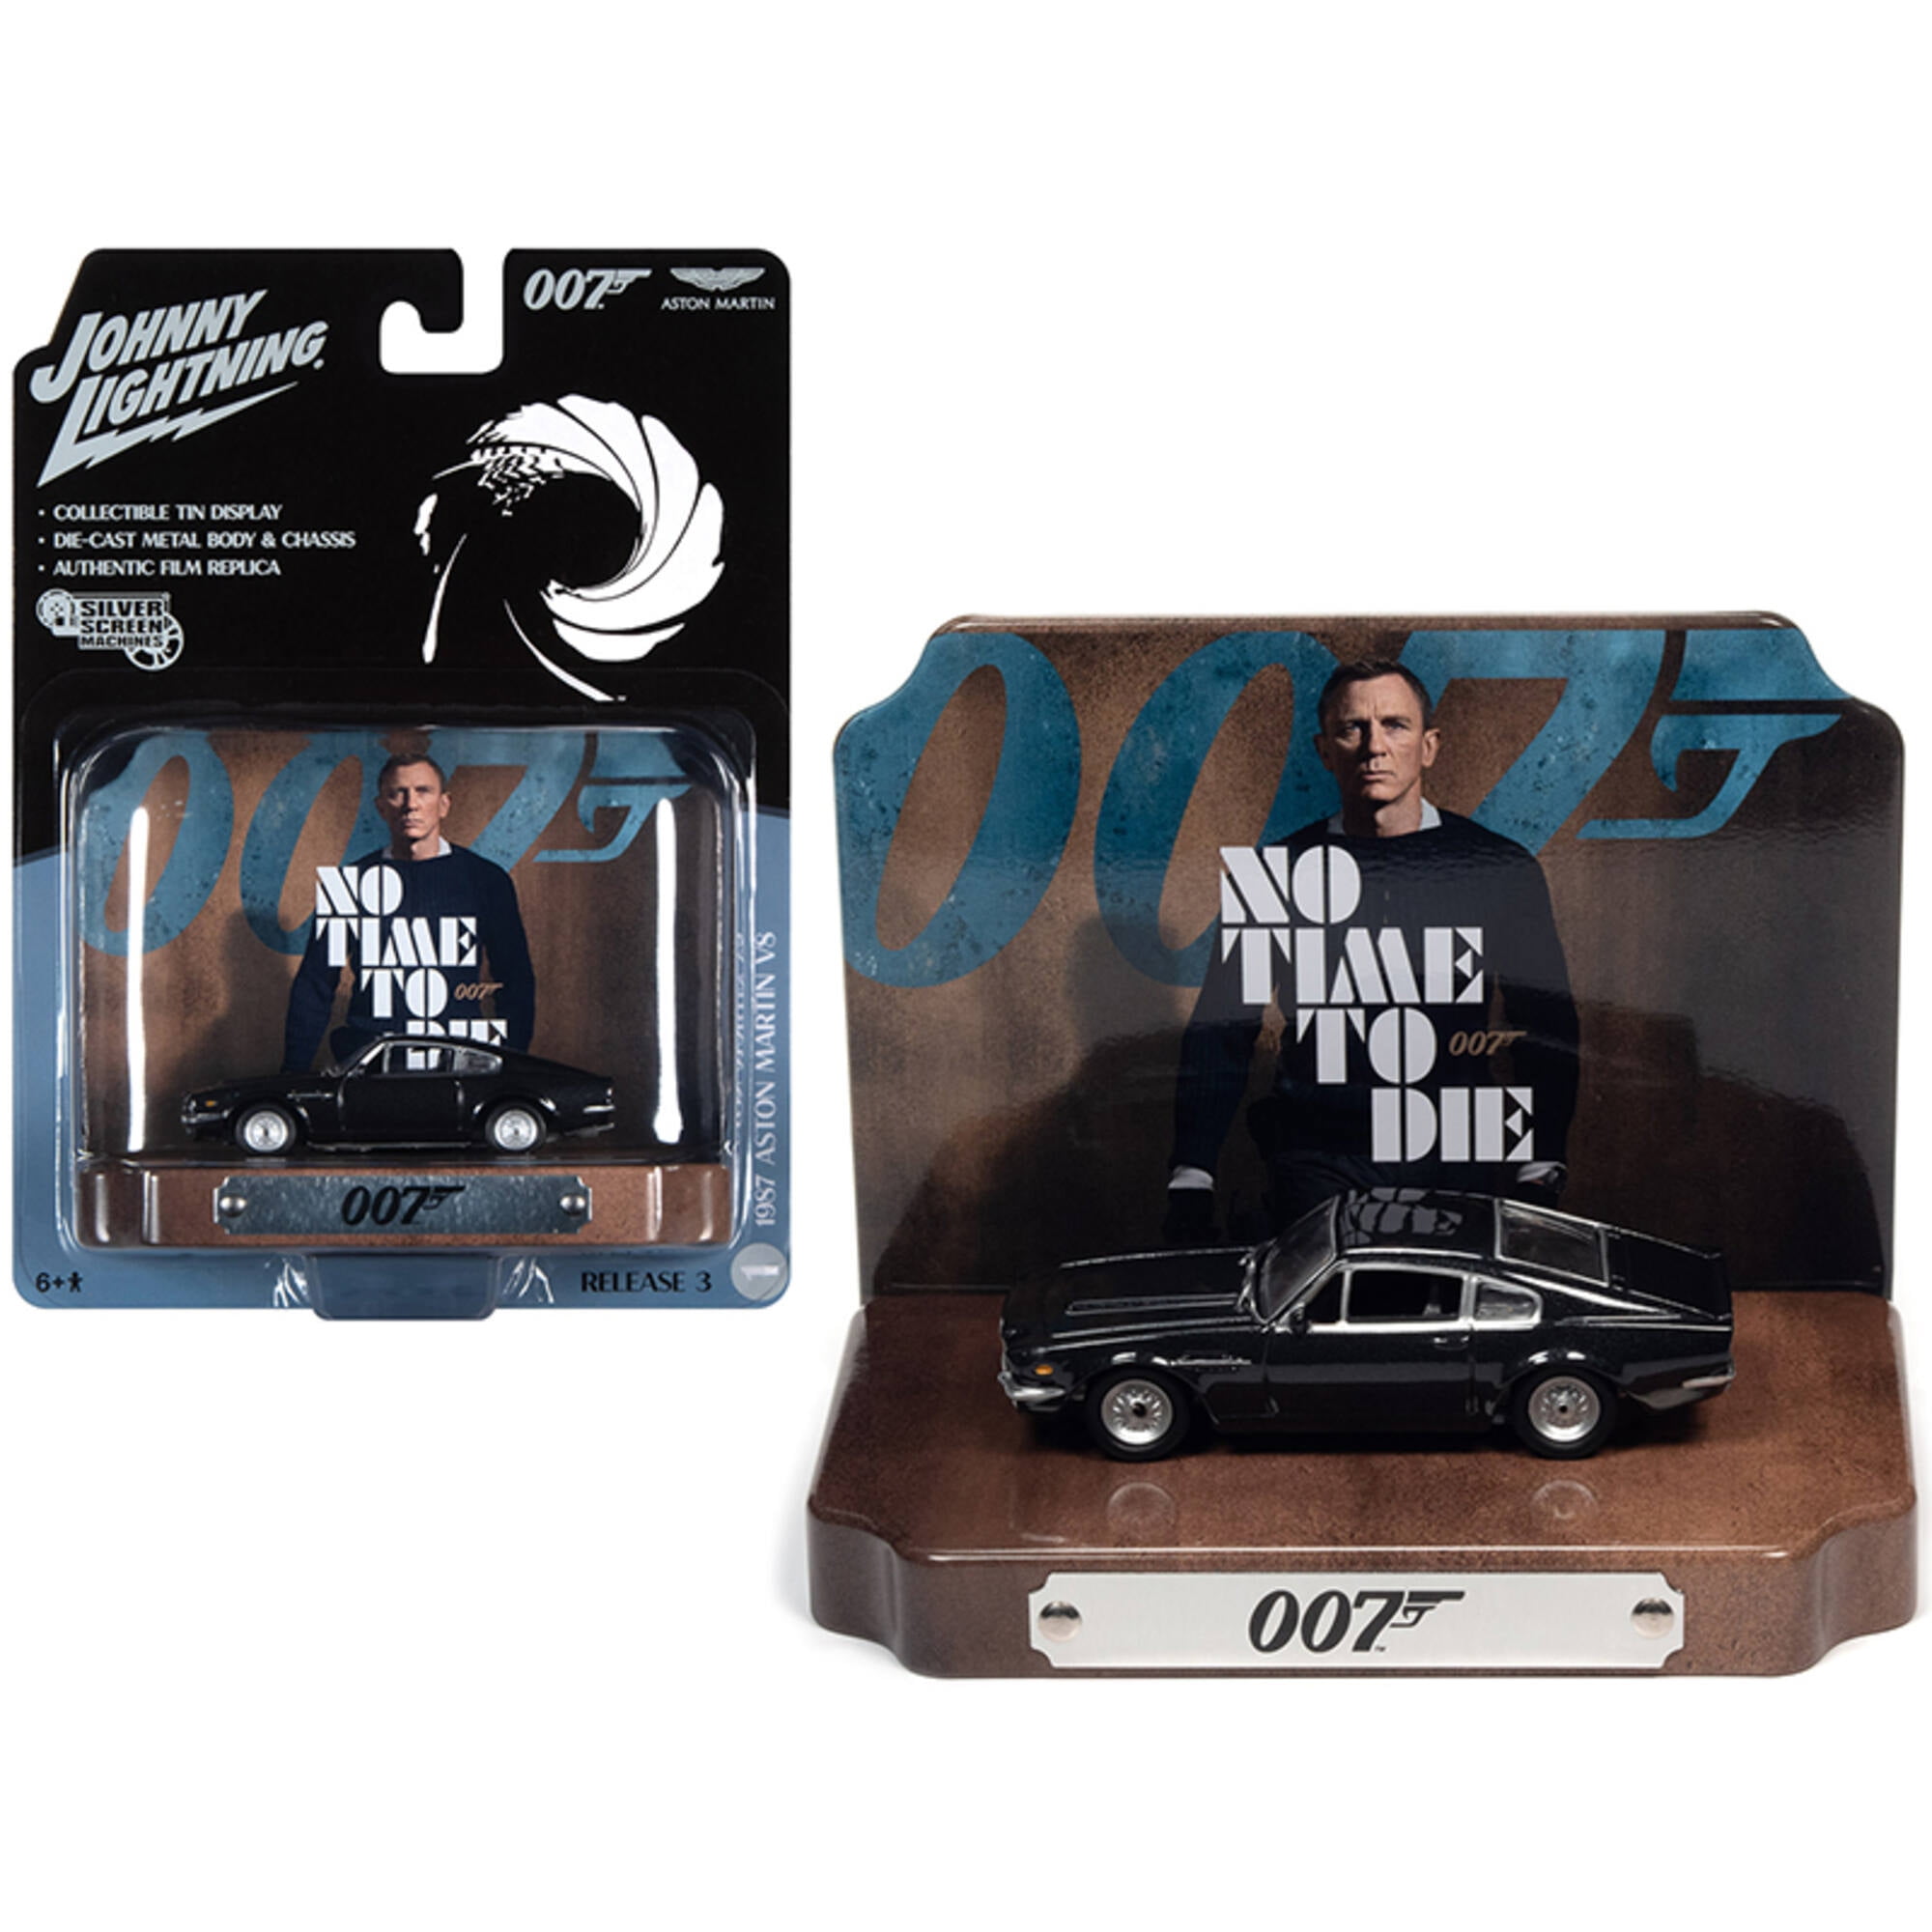 Picture of Johnny Lightning JLDR014-JLSP119 Series 0.16 4 Diecast Model Car for 1987 Aston Martin V8 Cumberland Gray with Collectible Tin Display 07 James Bond No Time to Die 2021 Movie 25th In The James Bond